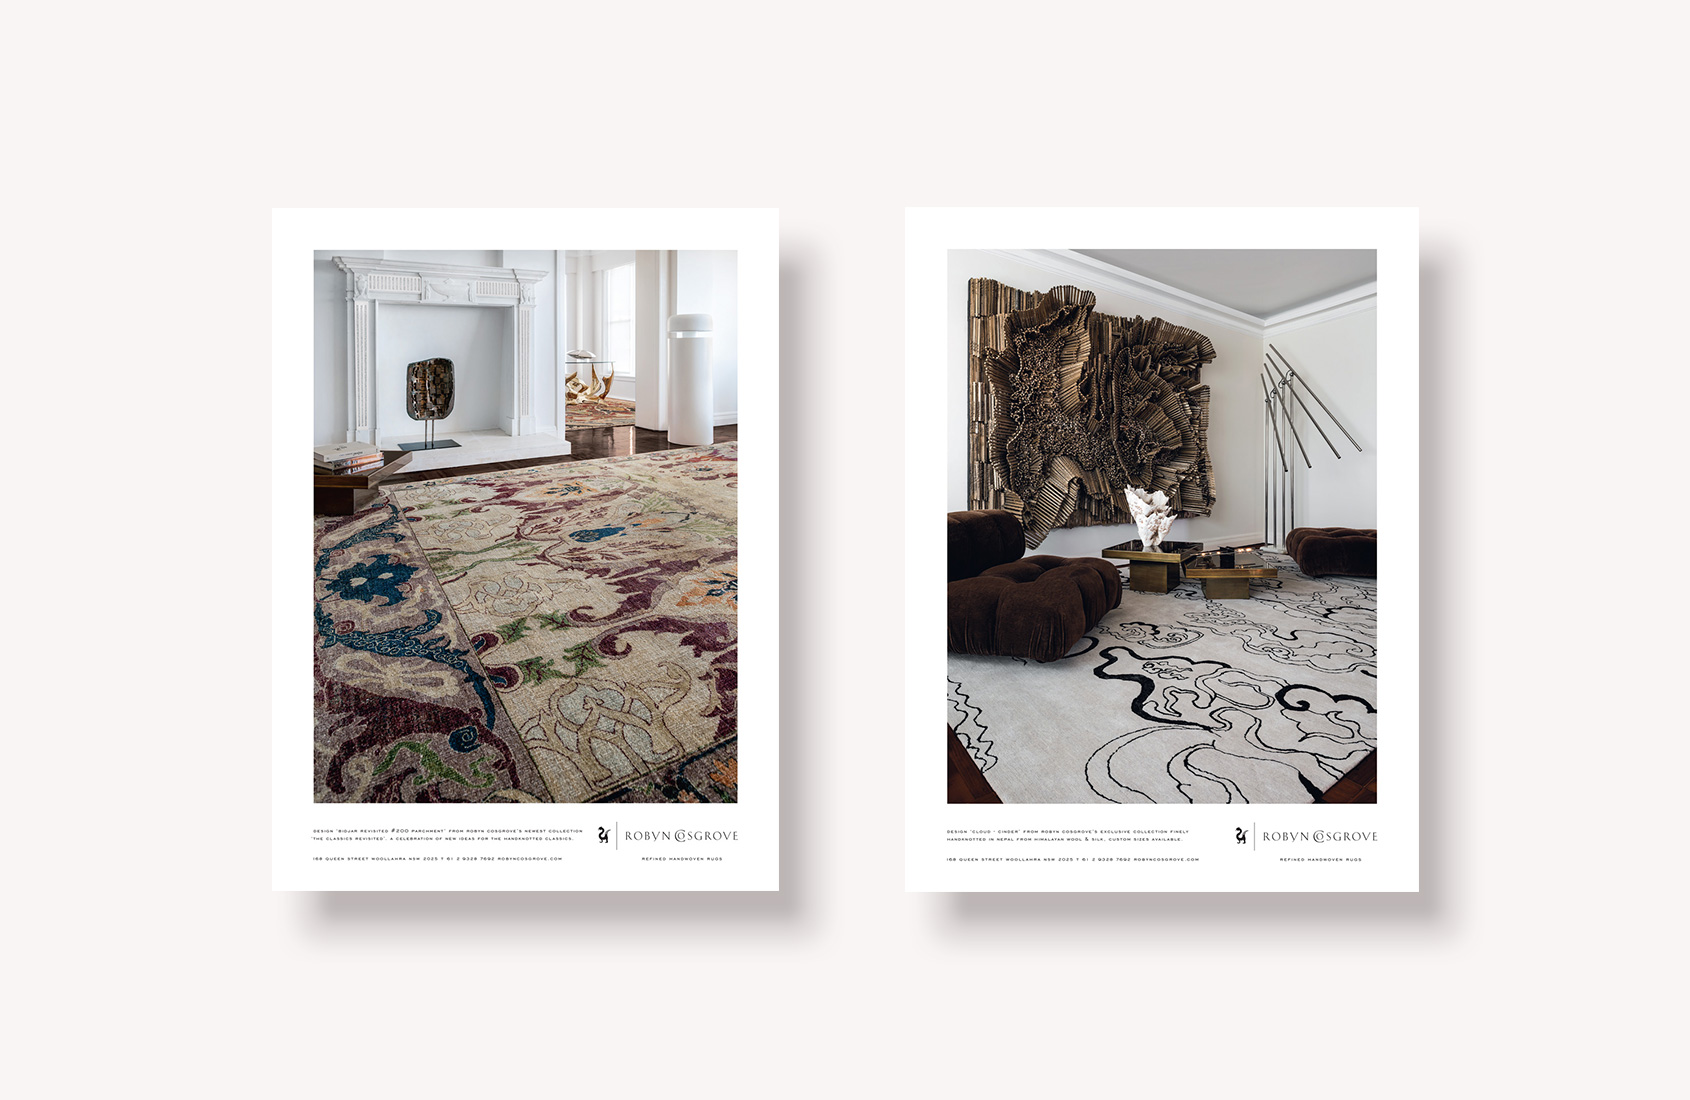 Robyn Cosgrove Rugs Refined Handwoven Designer Rugs Vogue Living ads2